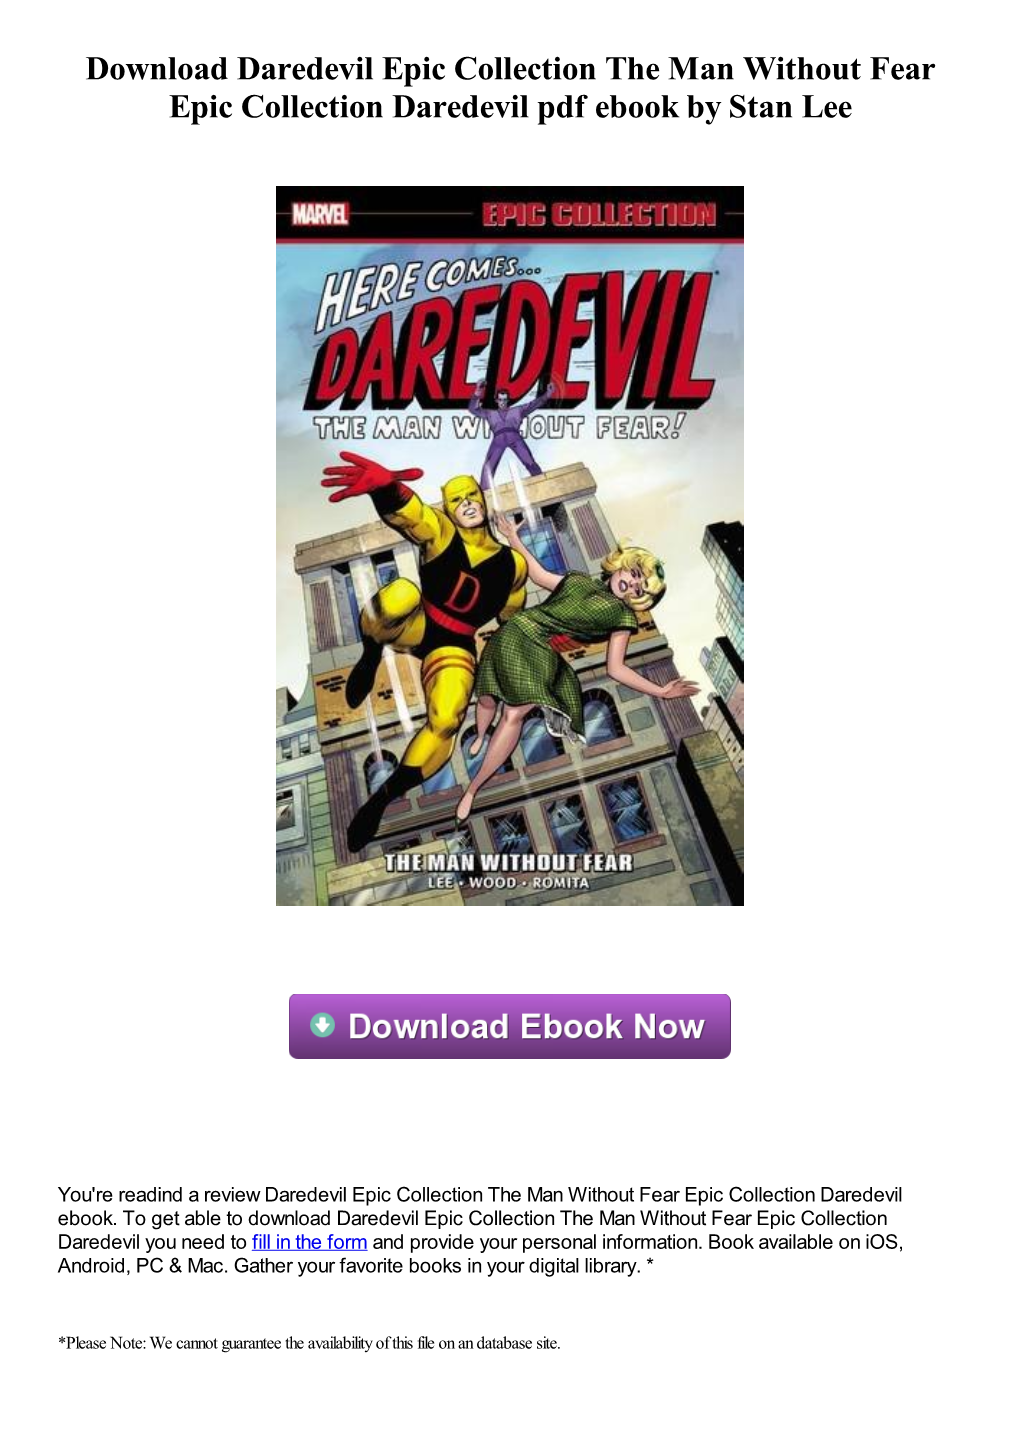 Daredevil Epic Collection the Man Without Fear Epic Collection Daredevil Pdf Ebook by Stan Lee